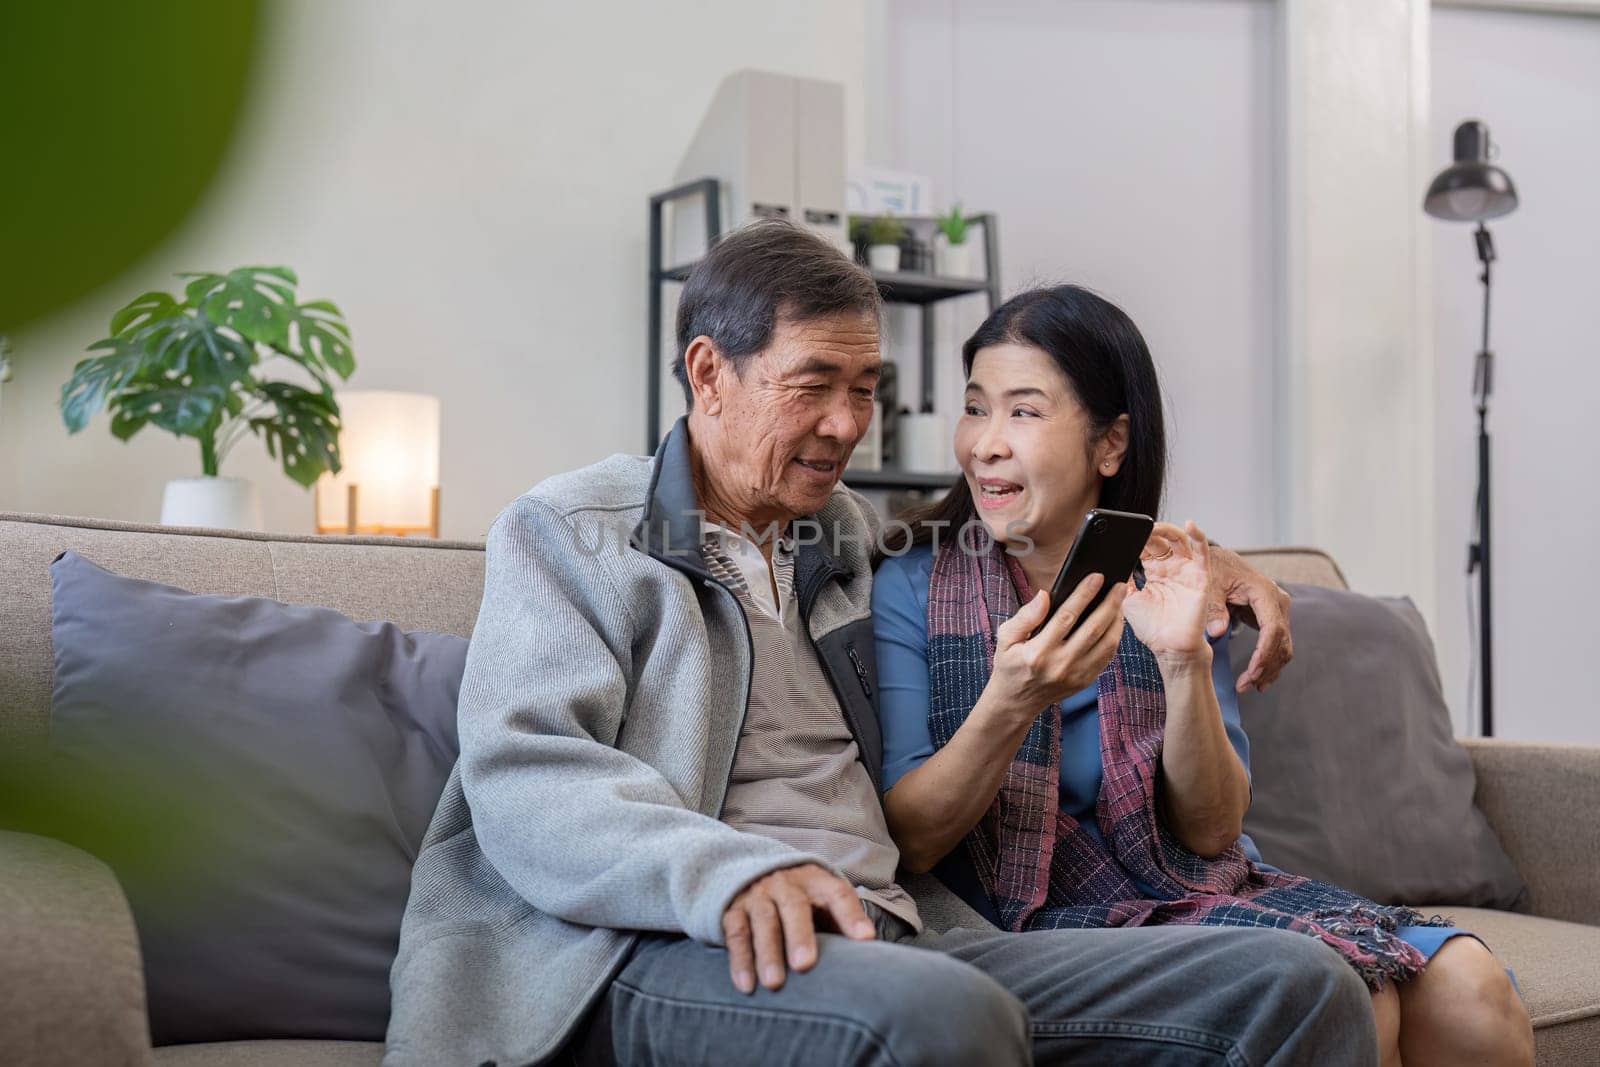 Senior couple enjoying time at home with smartphone. Concept of technology, companionship, and relaxation.